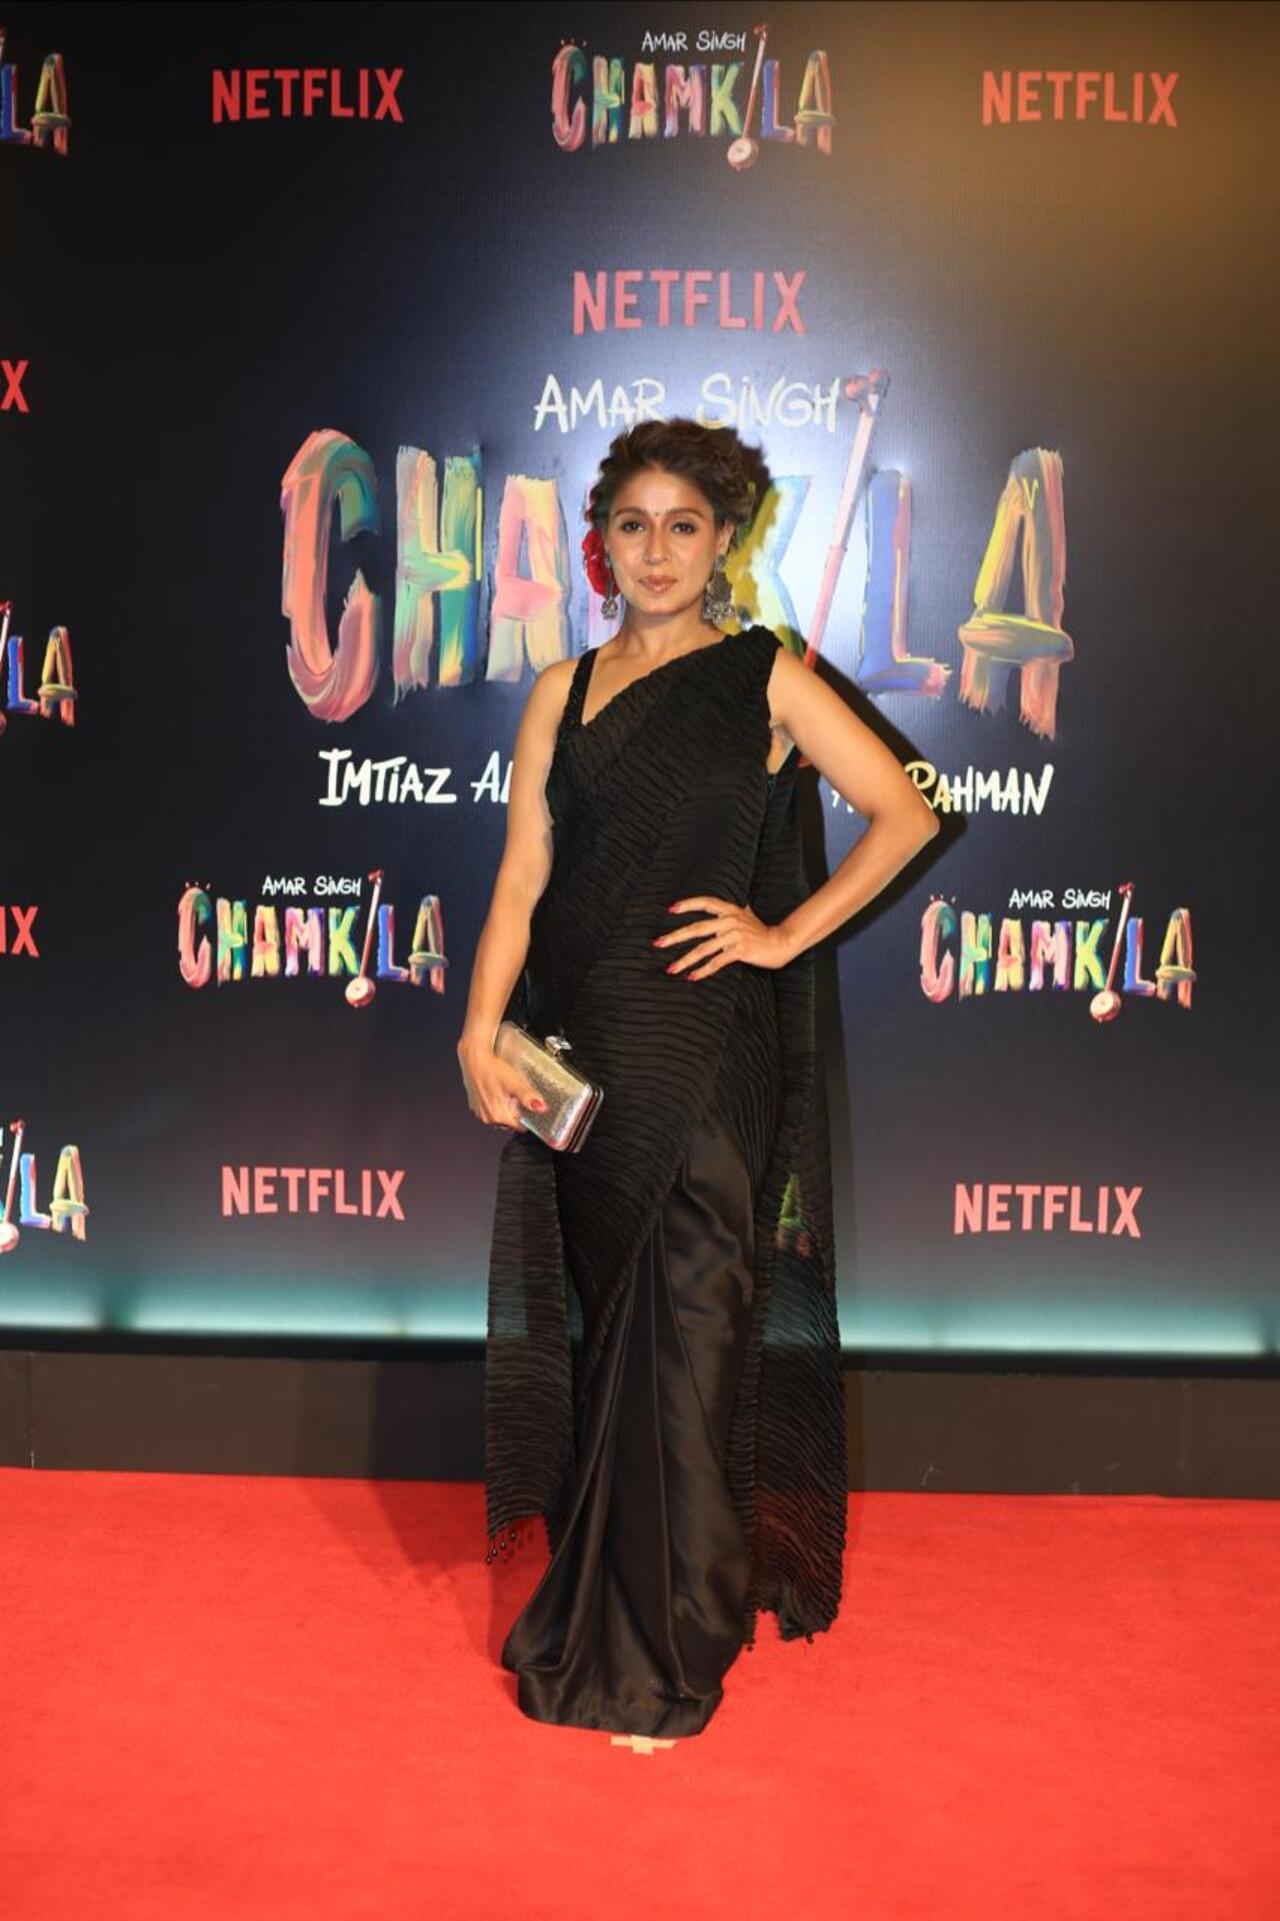 Sunidhi Chauhan gave retro vibes with her back saree and hair updo